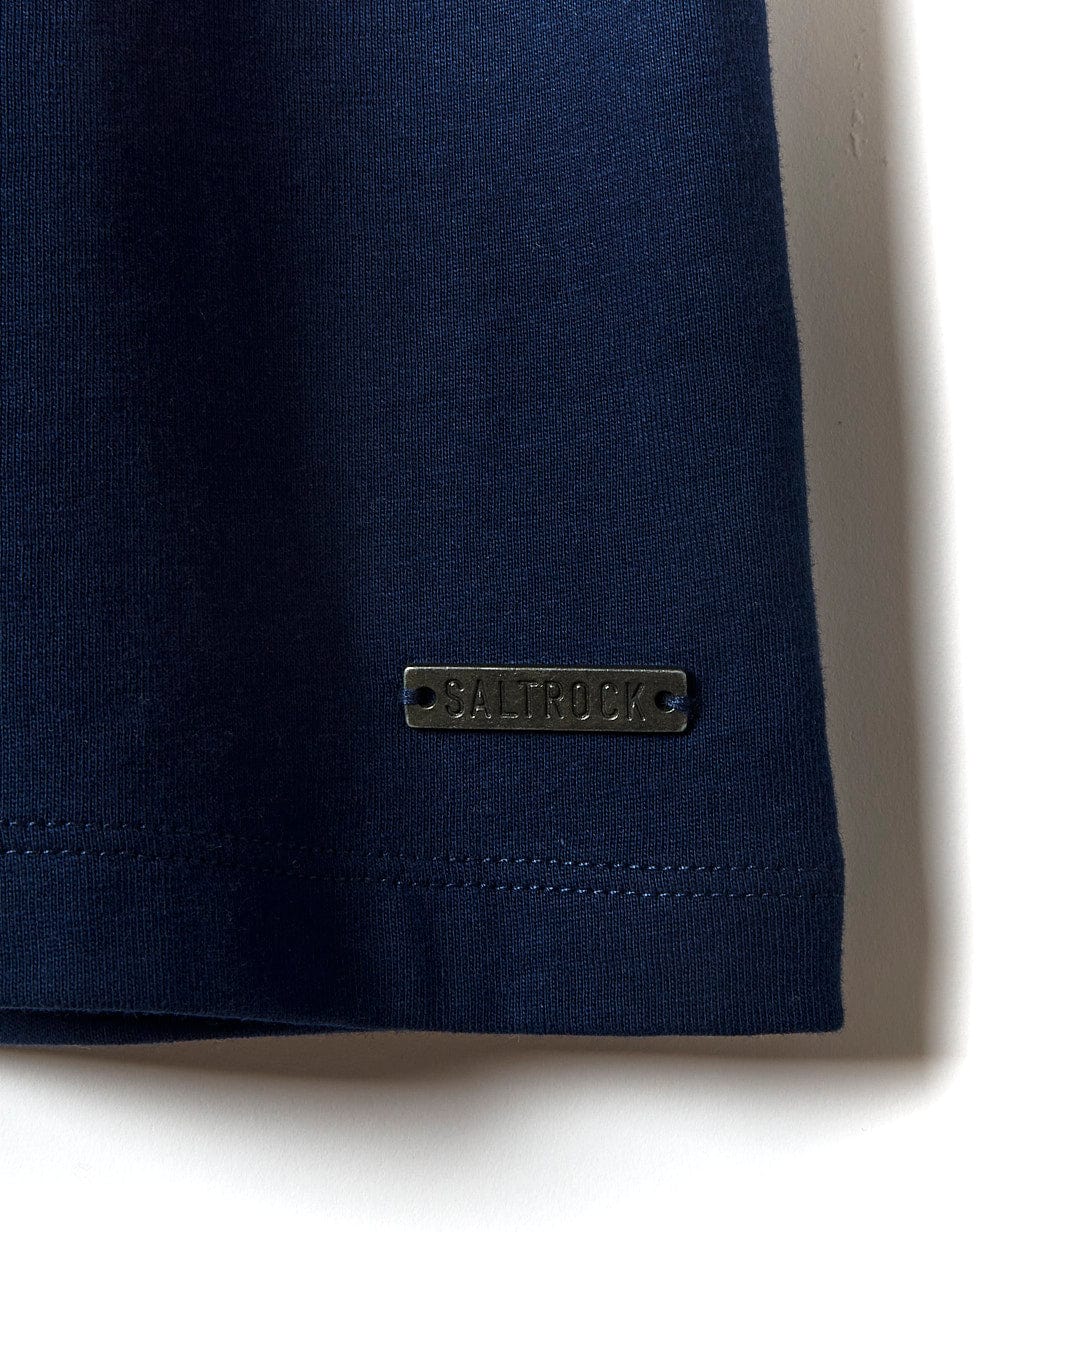 A close up of a Saltrock Flax - Womens Tie Vest Dress - Blue with a logo on it.